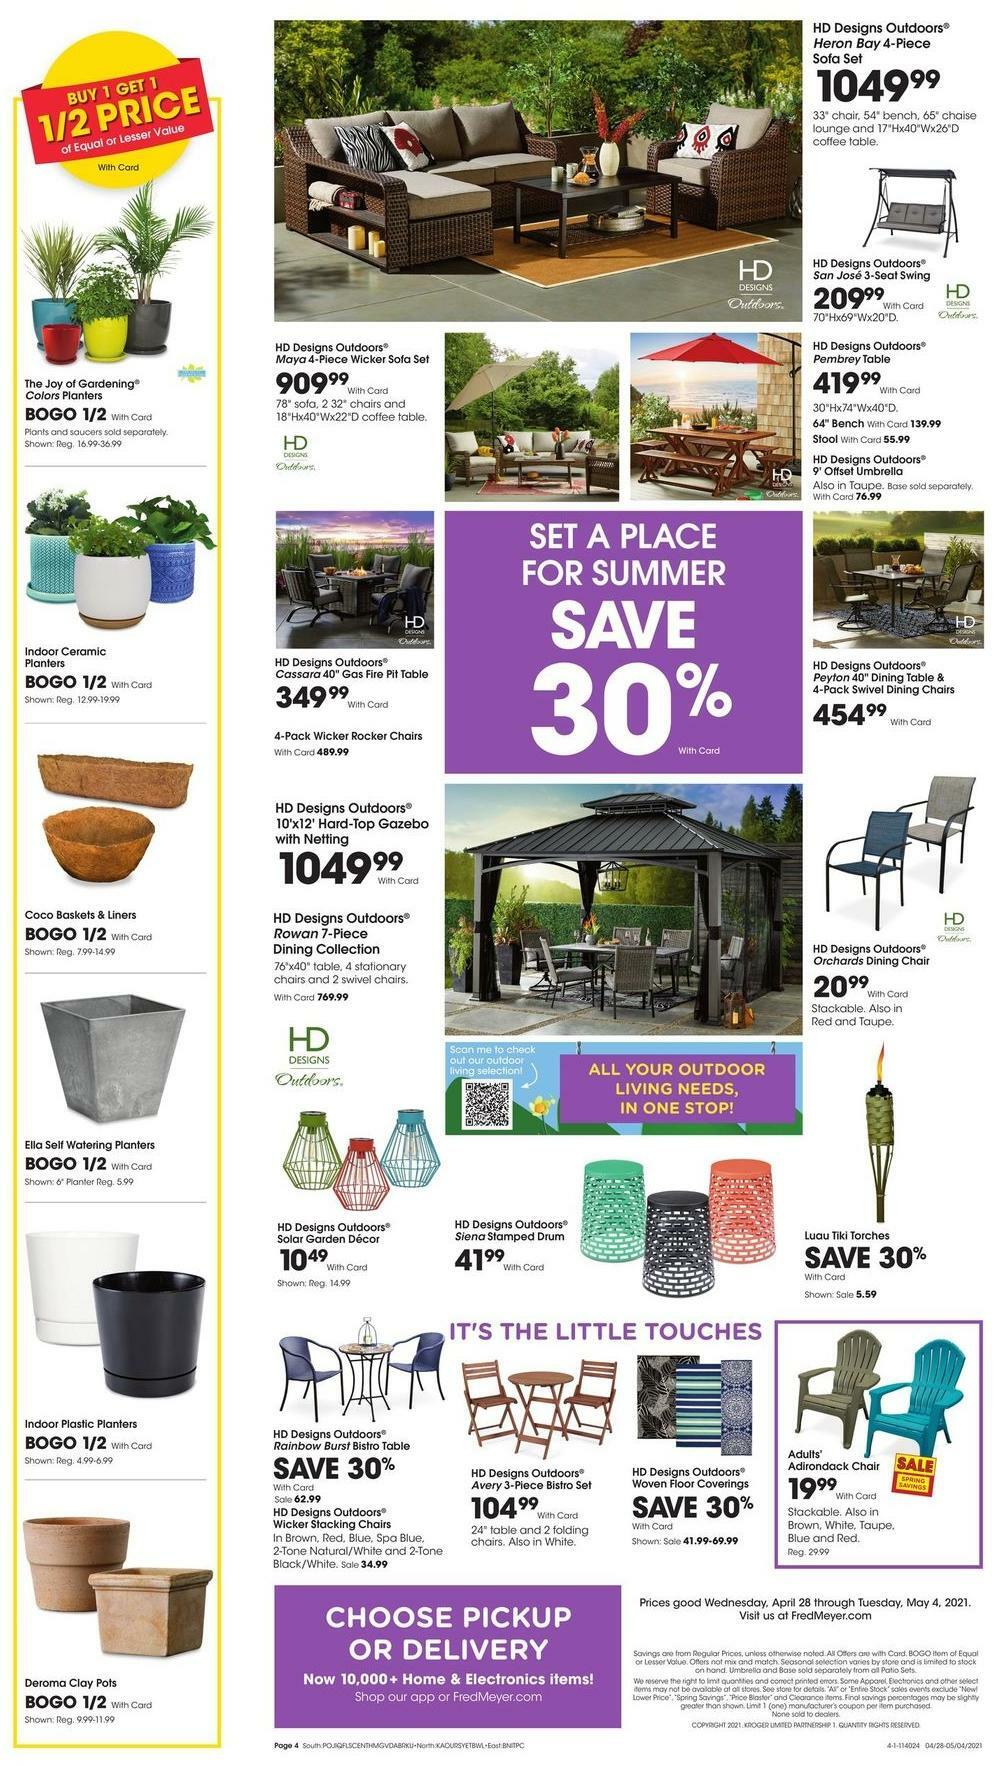 Fred Meyer Garden Weekly Ad & Specials from April 28 Page 4